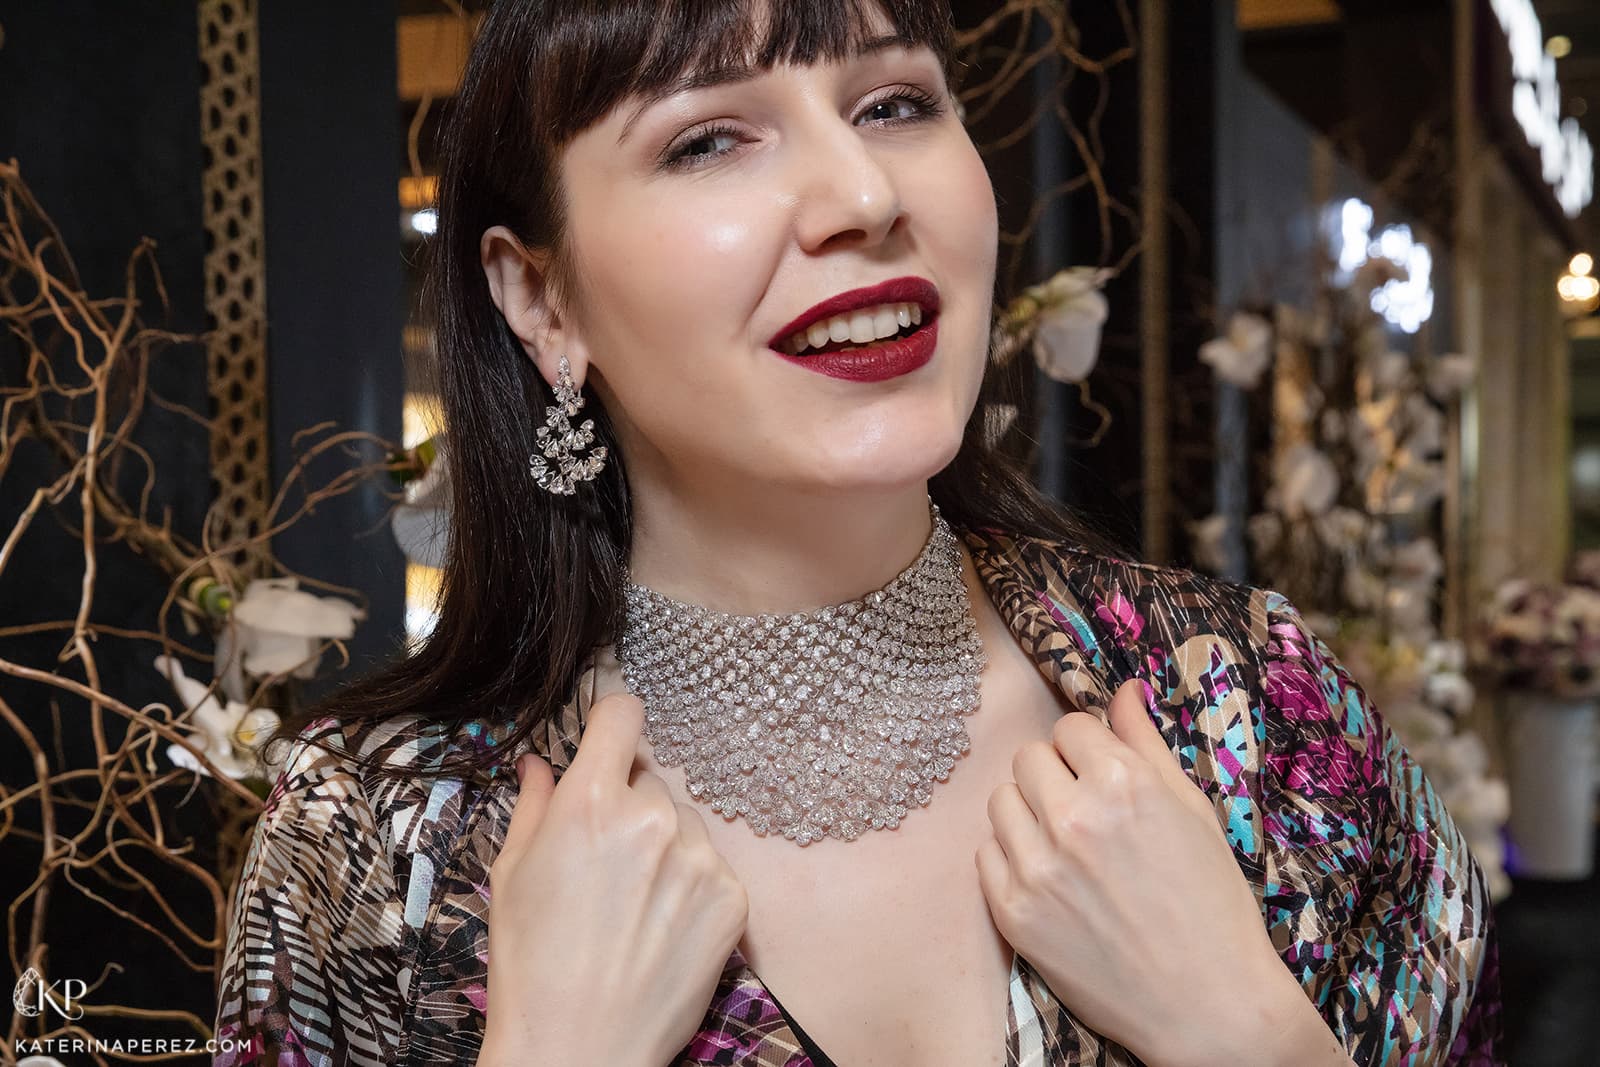 Jaipur Gems necklace and earrings from Dazzling Diamonds collection. Photo by Simon Martner